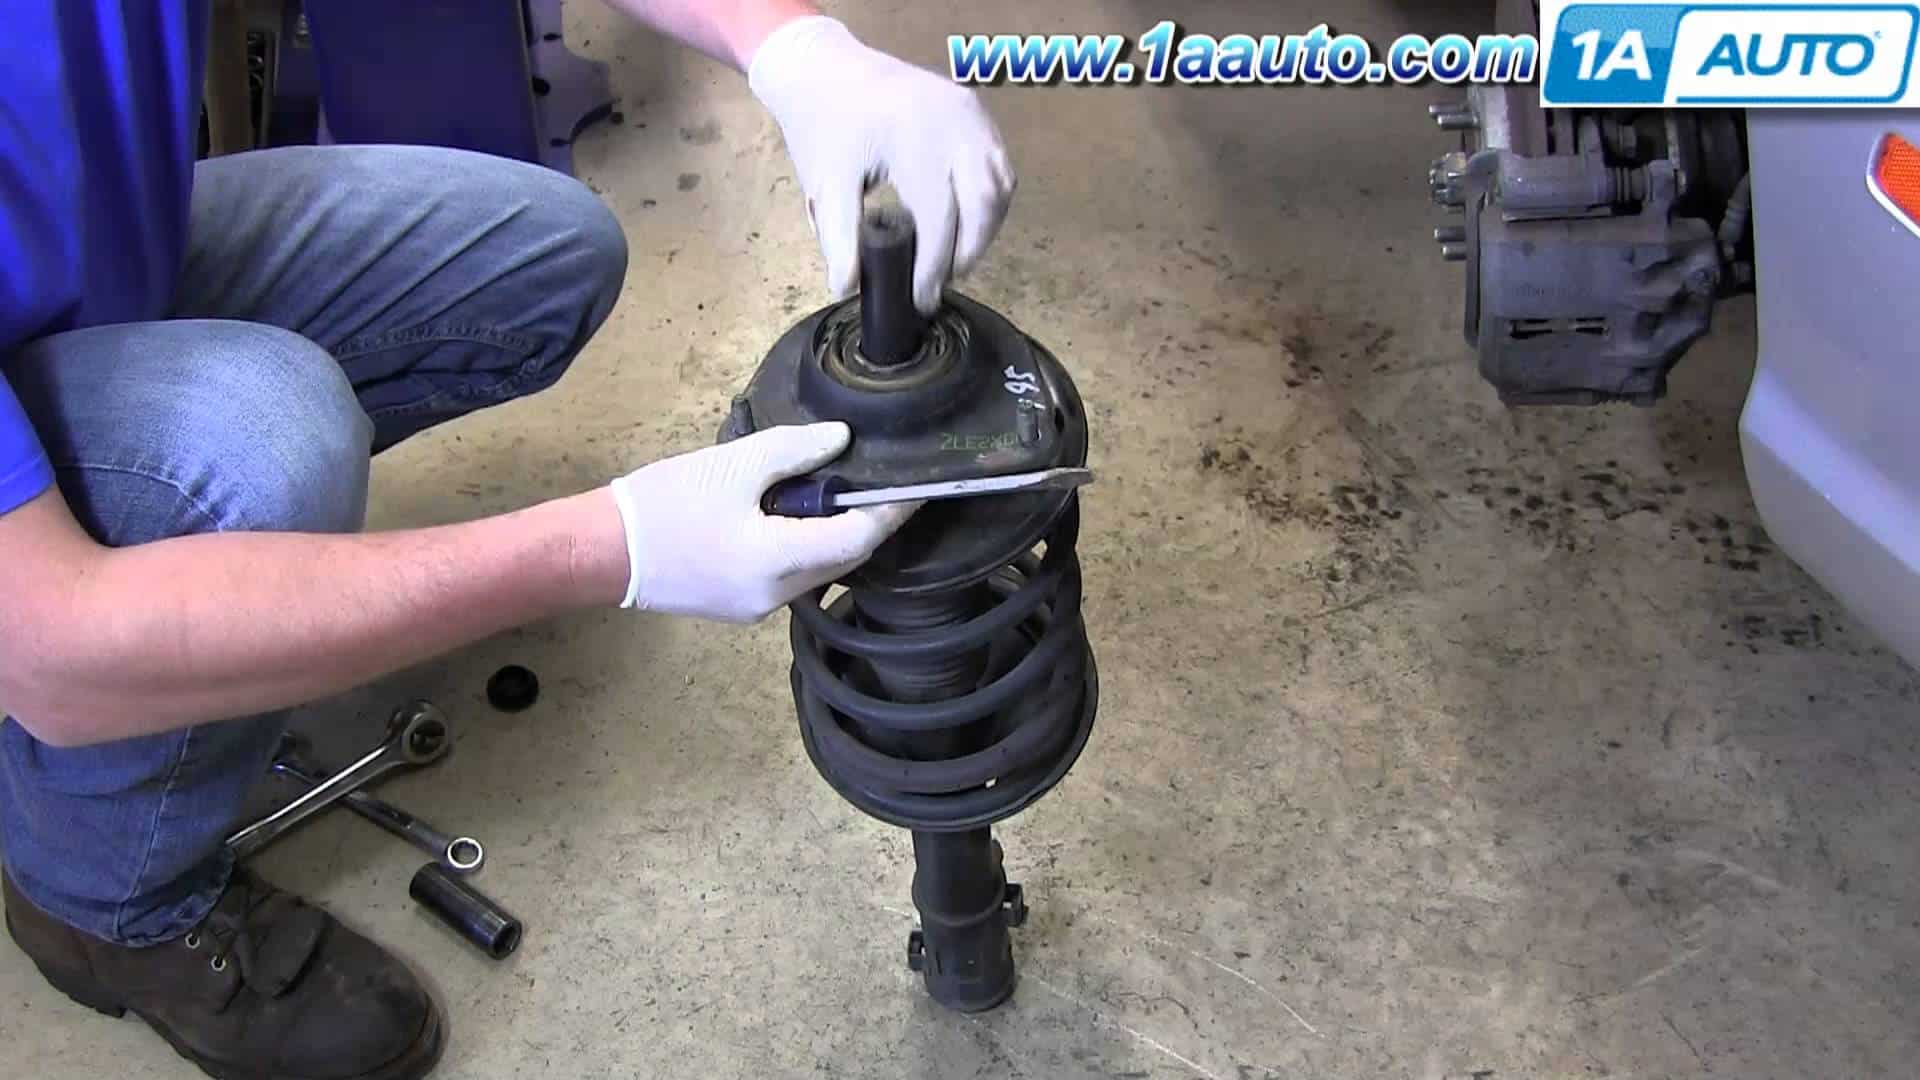 Removing the old shocks